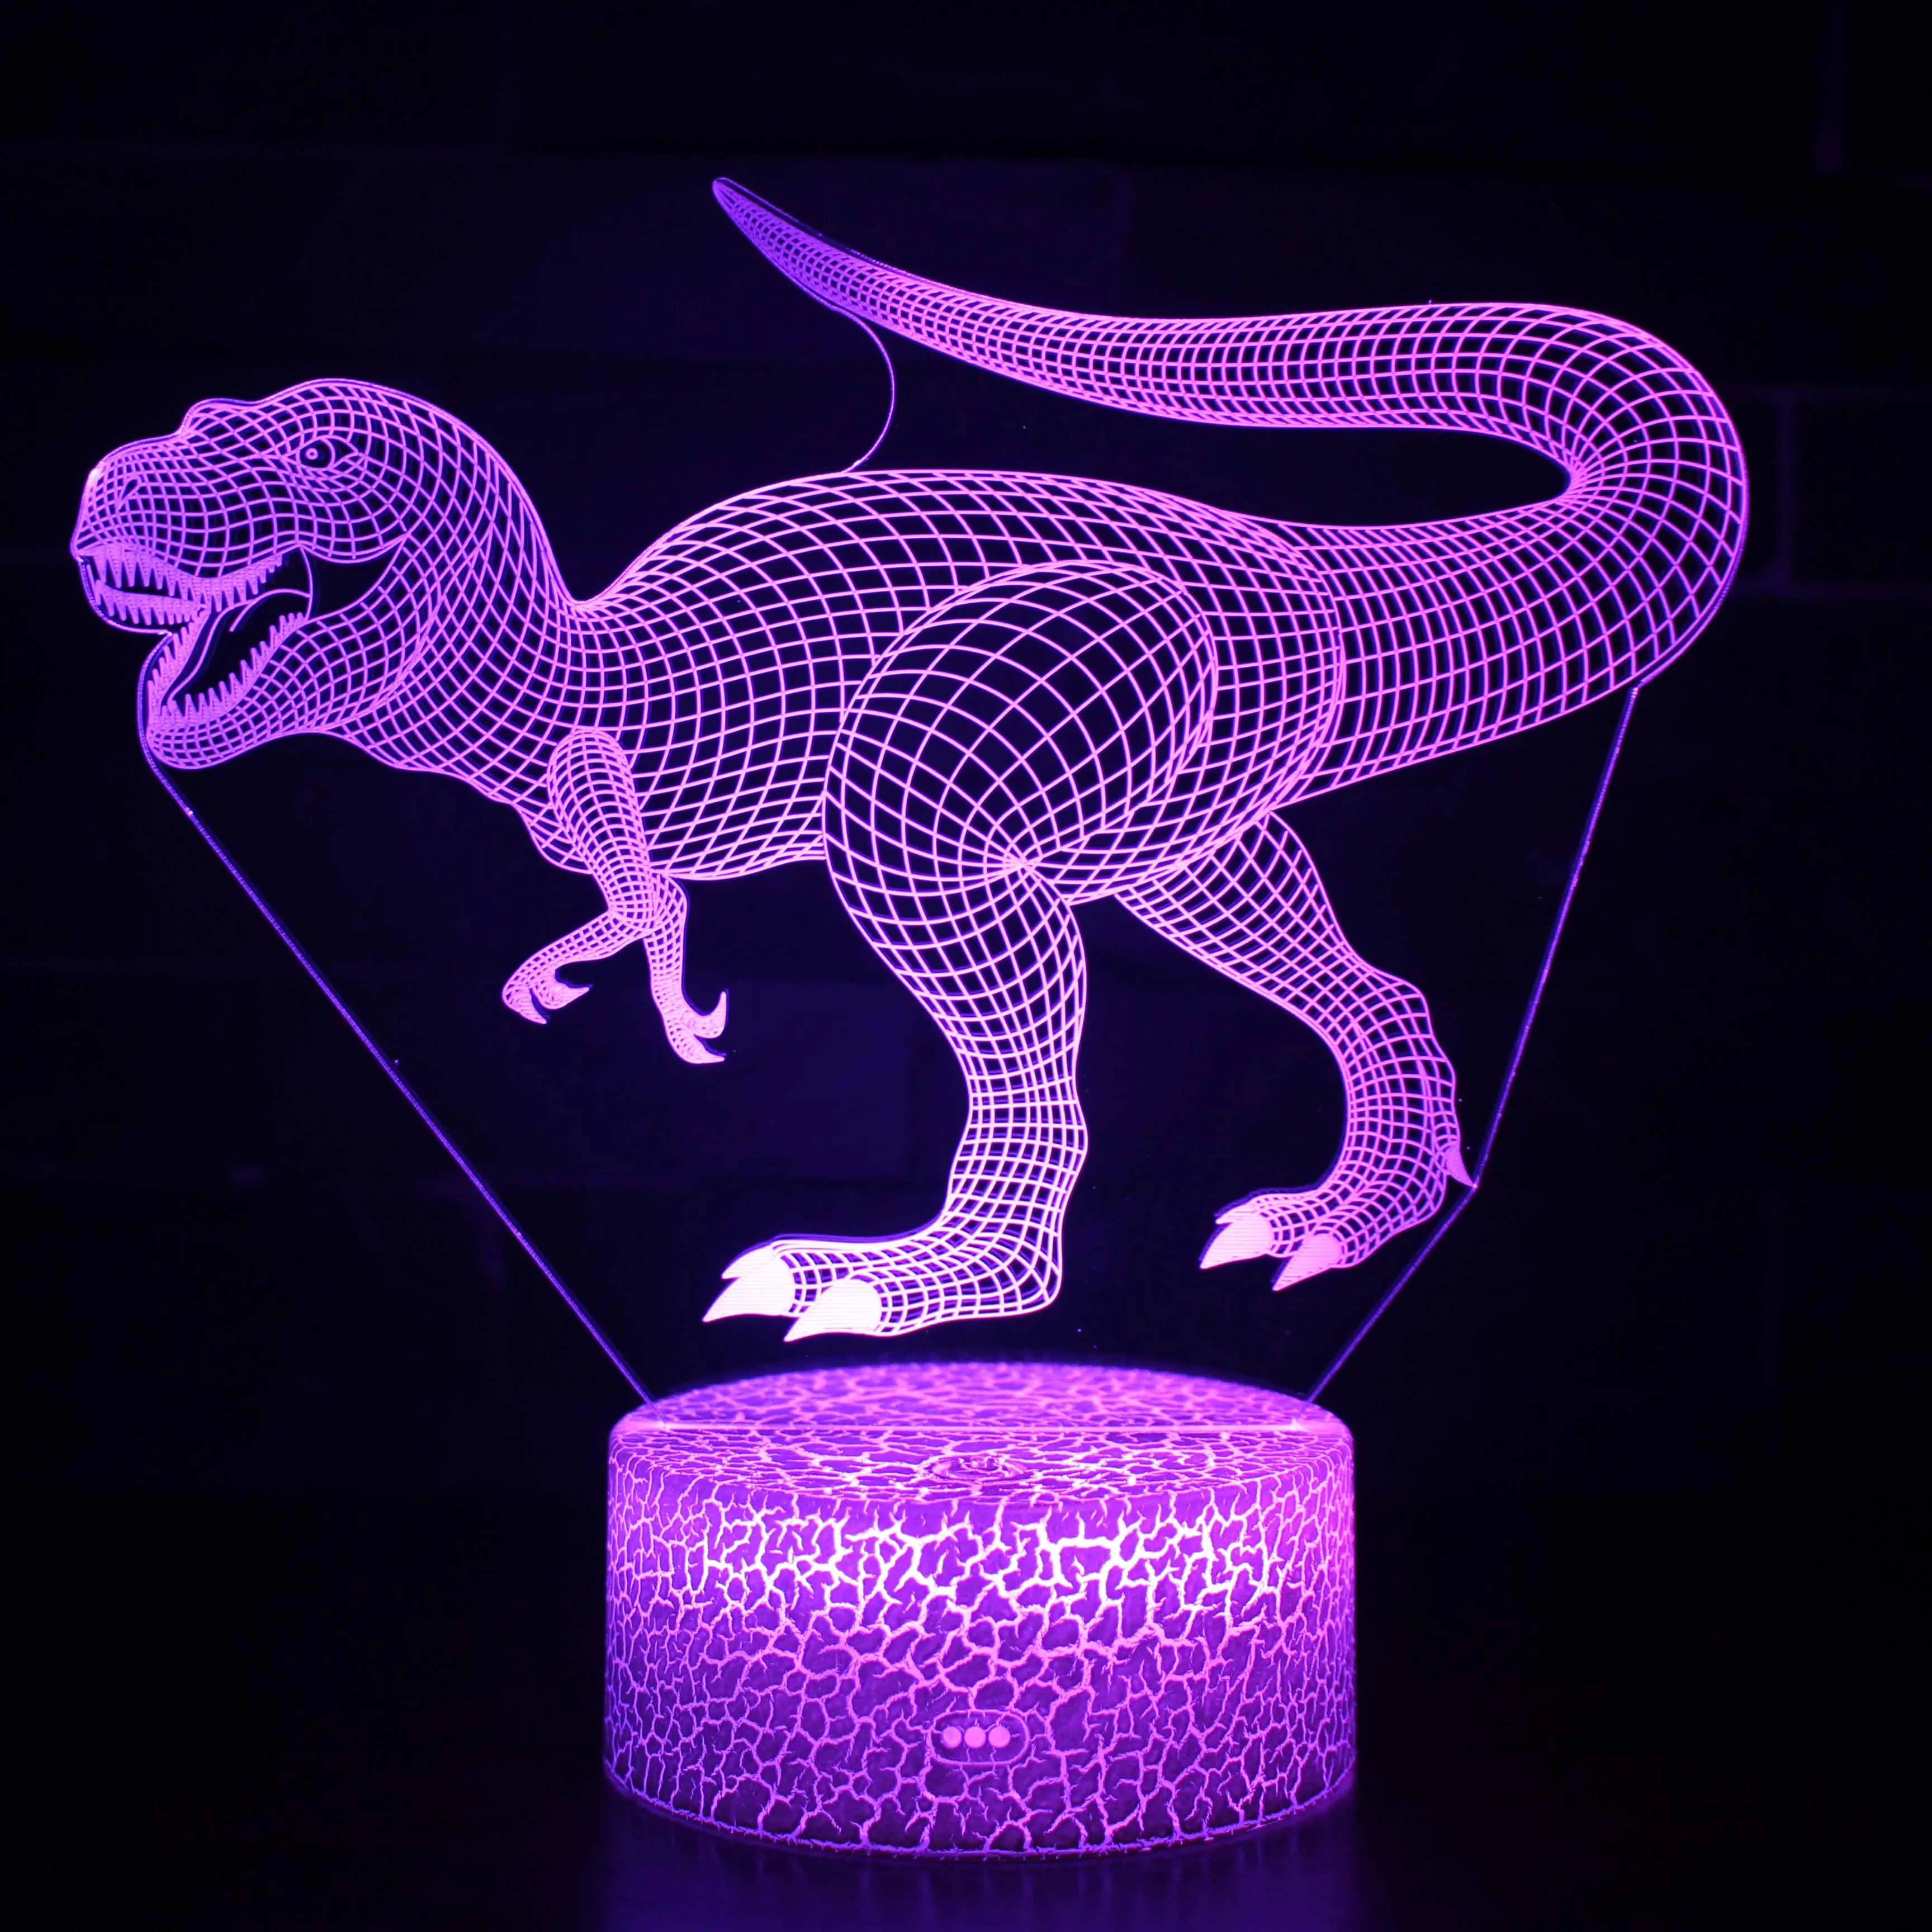 home depot dinosaur light 3D LED Dinosaur Night Lights Colorful Touch Remote Control 7/16 Color Desk Lamp Christmas Gift Visual Light Dragon Series night stand lamps Night Lights